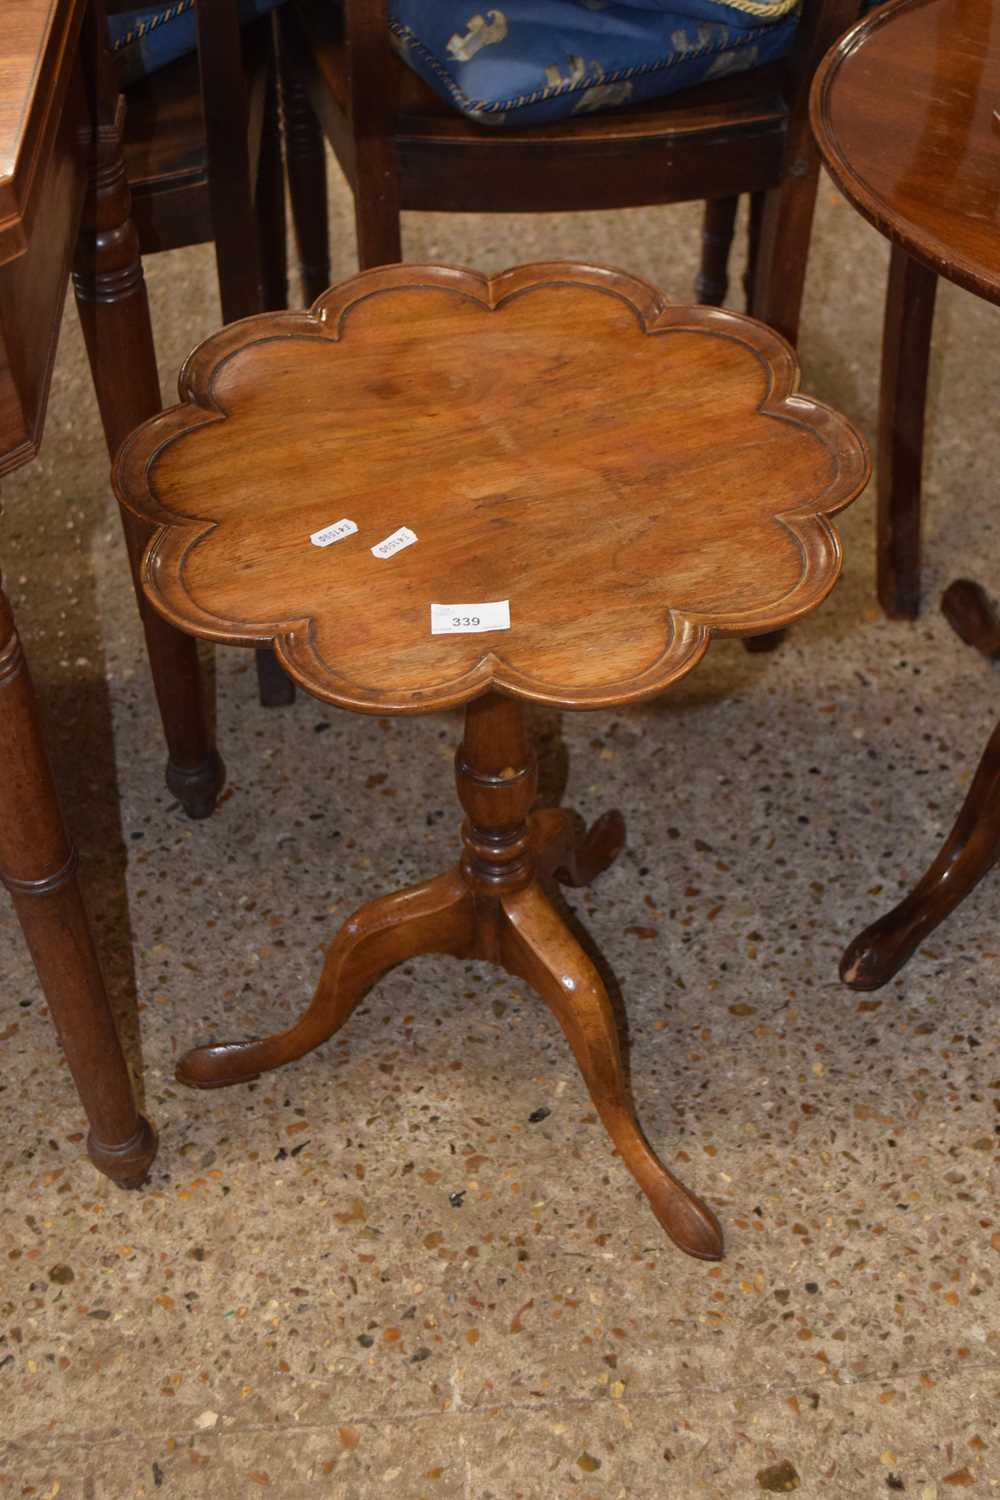 Reproduction Georgian style mahogany wine table with shaped top, turned column and tripod base